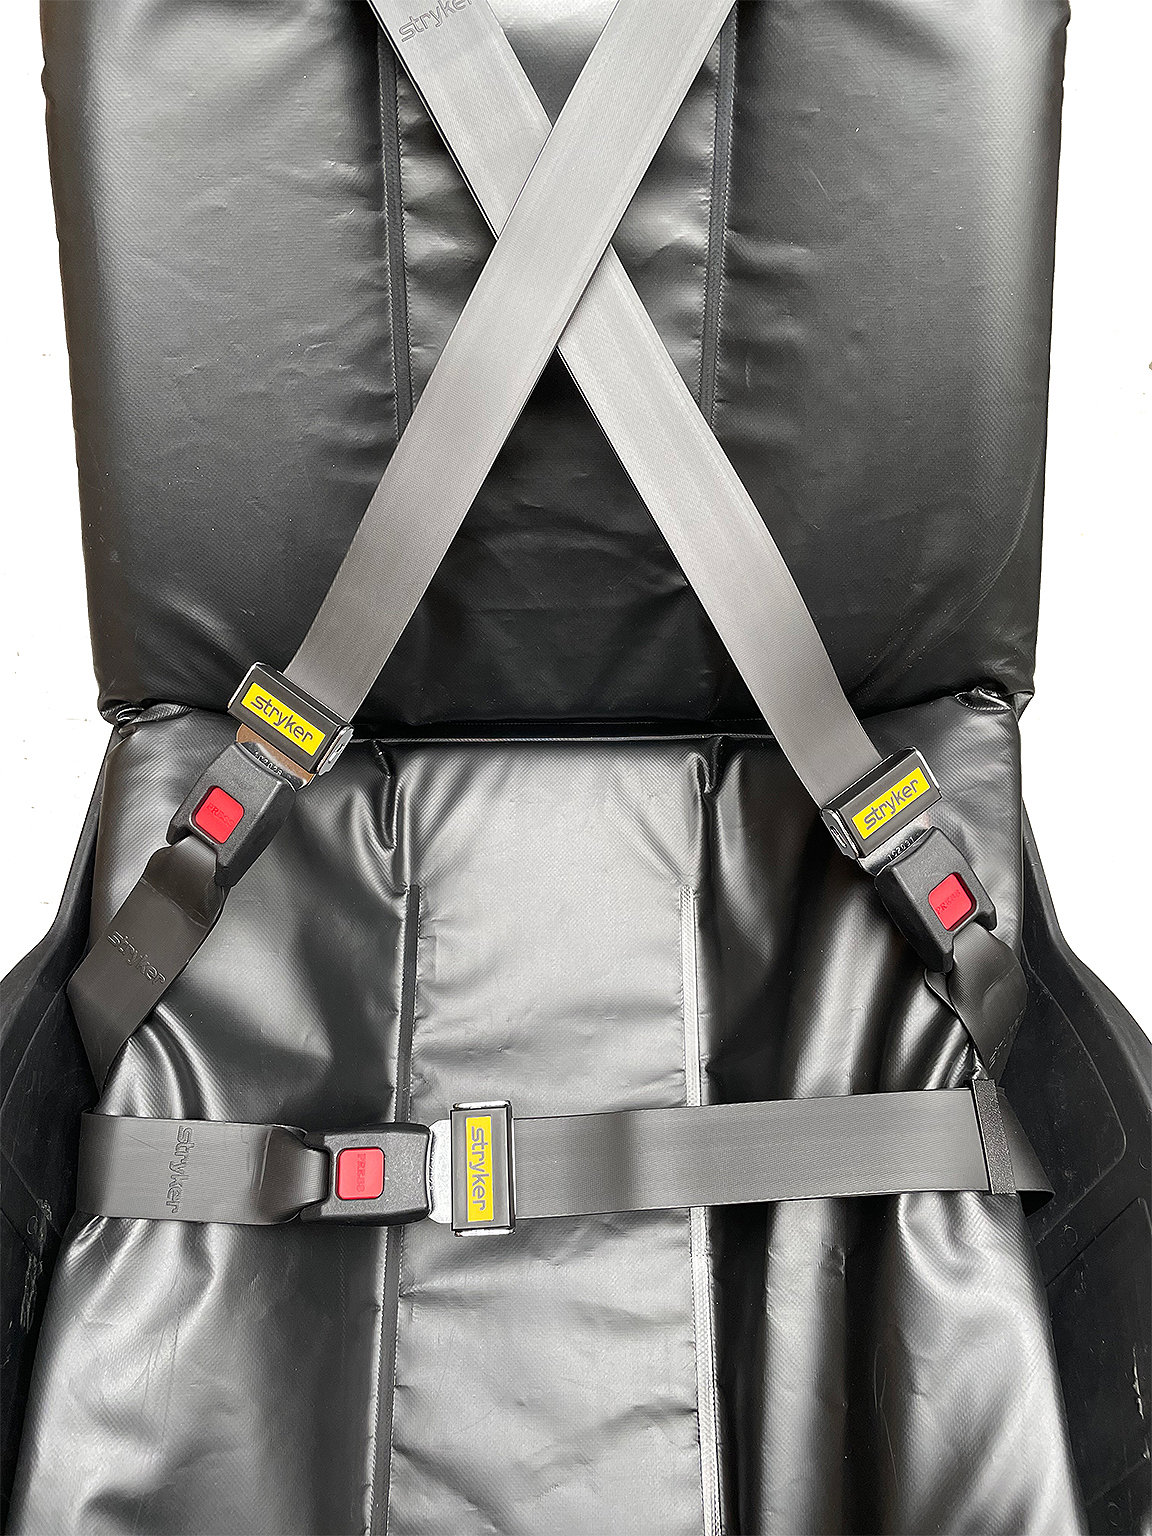 XPR ambulance cot restraints are compatible with a variety of Stryker's ambulance cots